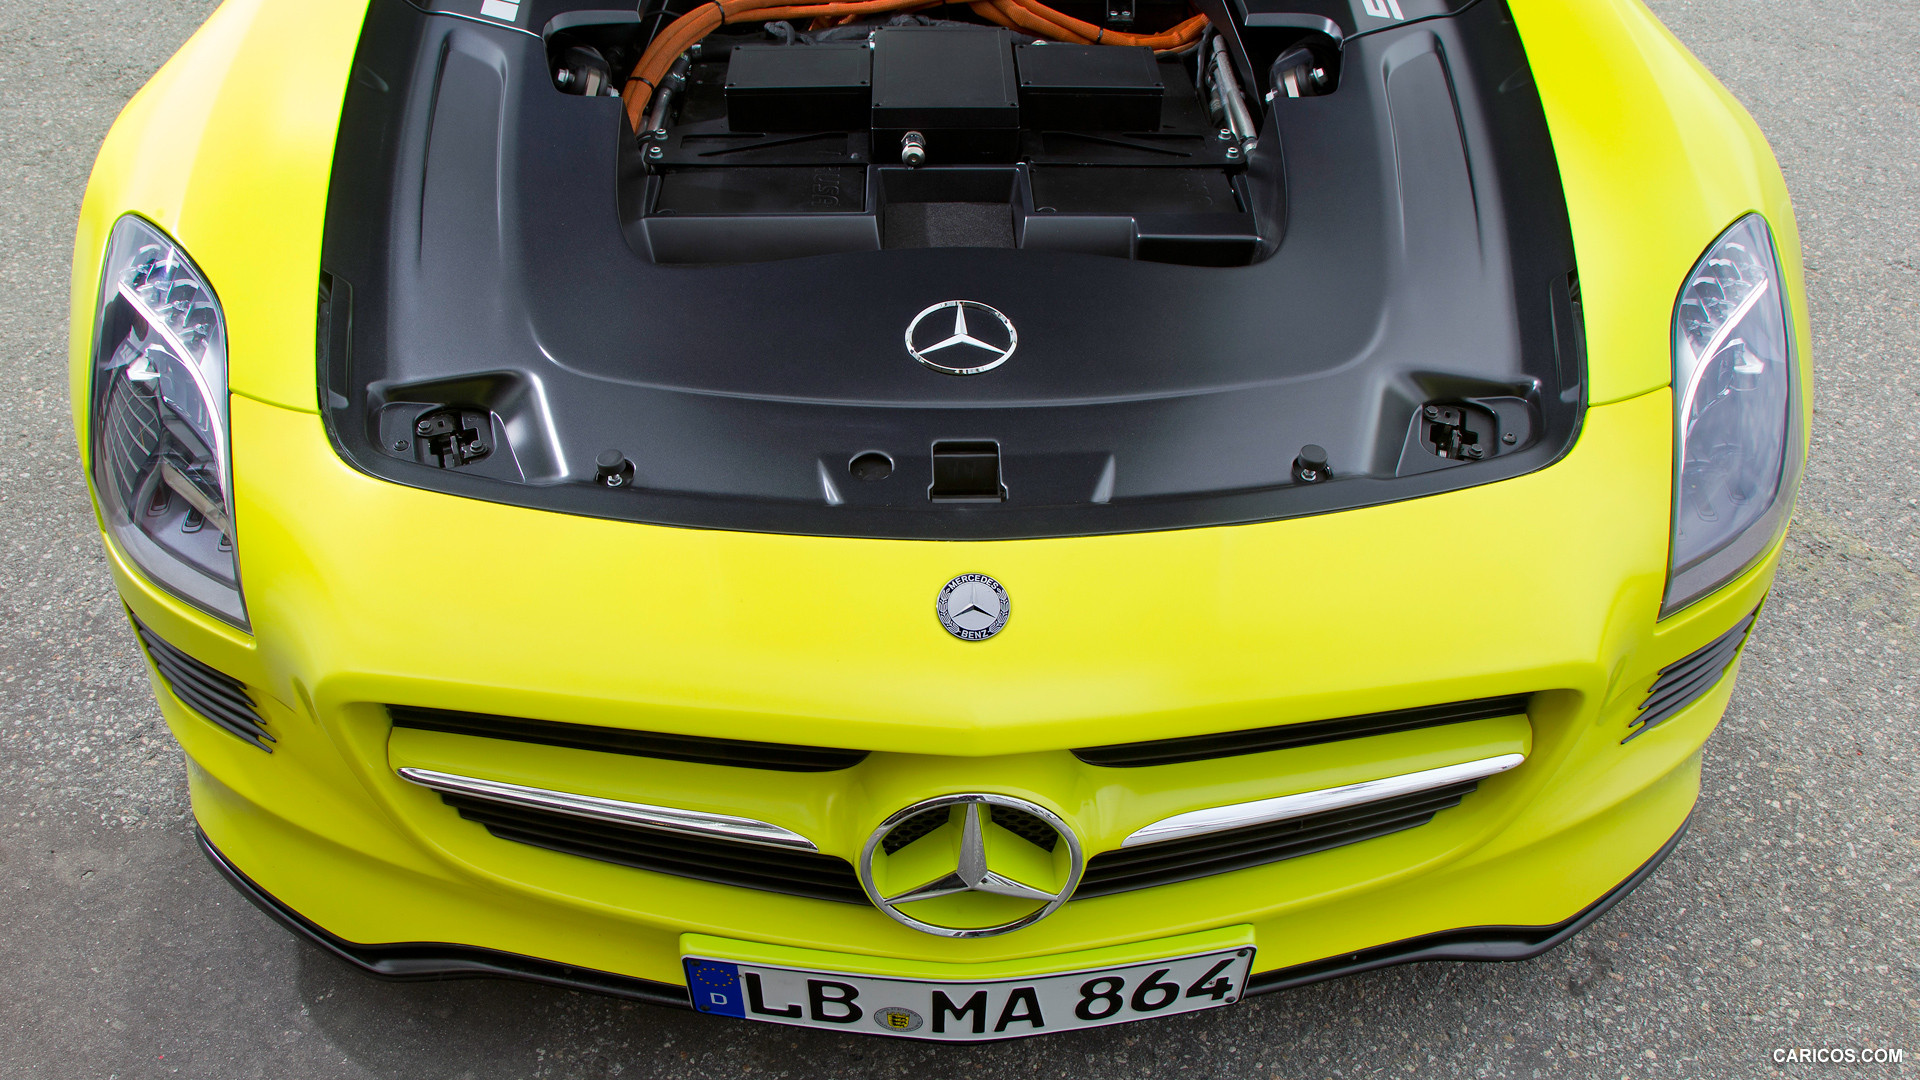 Mercedes-Benz SLS AMG E-CELL Concept  - Front, #30 of 60